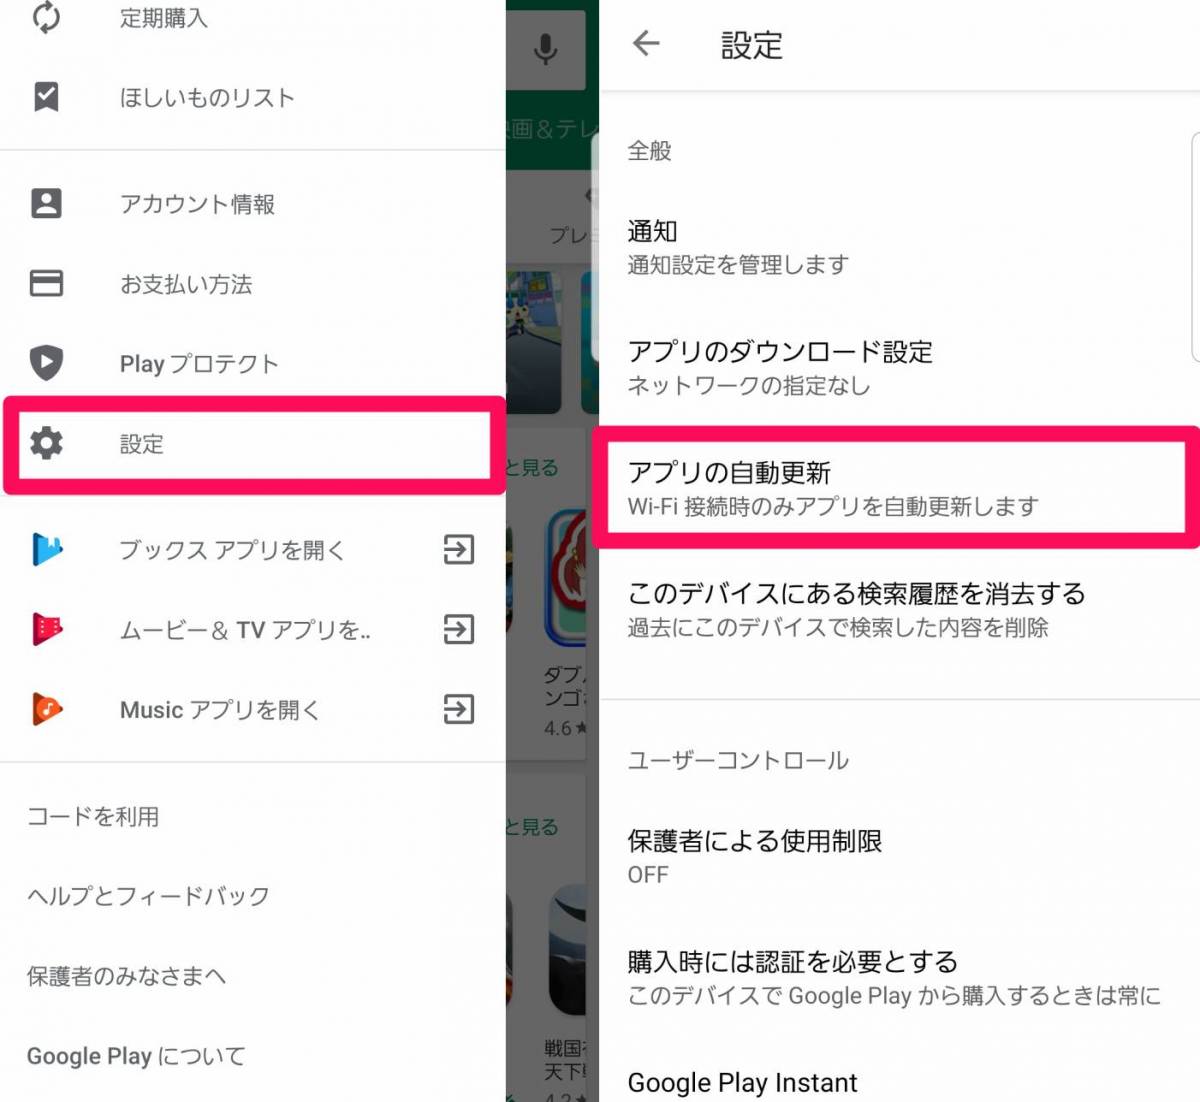 Androidスマホの通信量節約術 ギガ不足を解消する20の方法 Appliv Topics